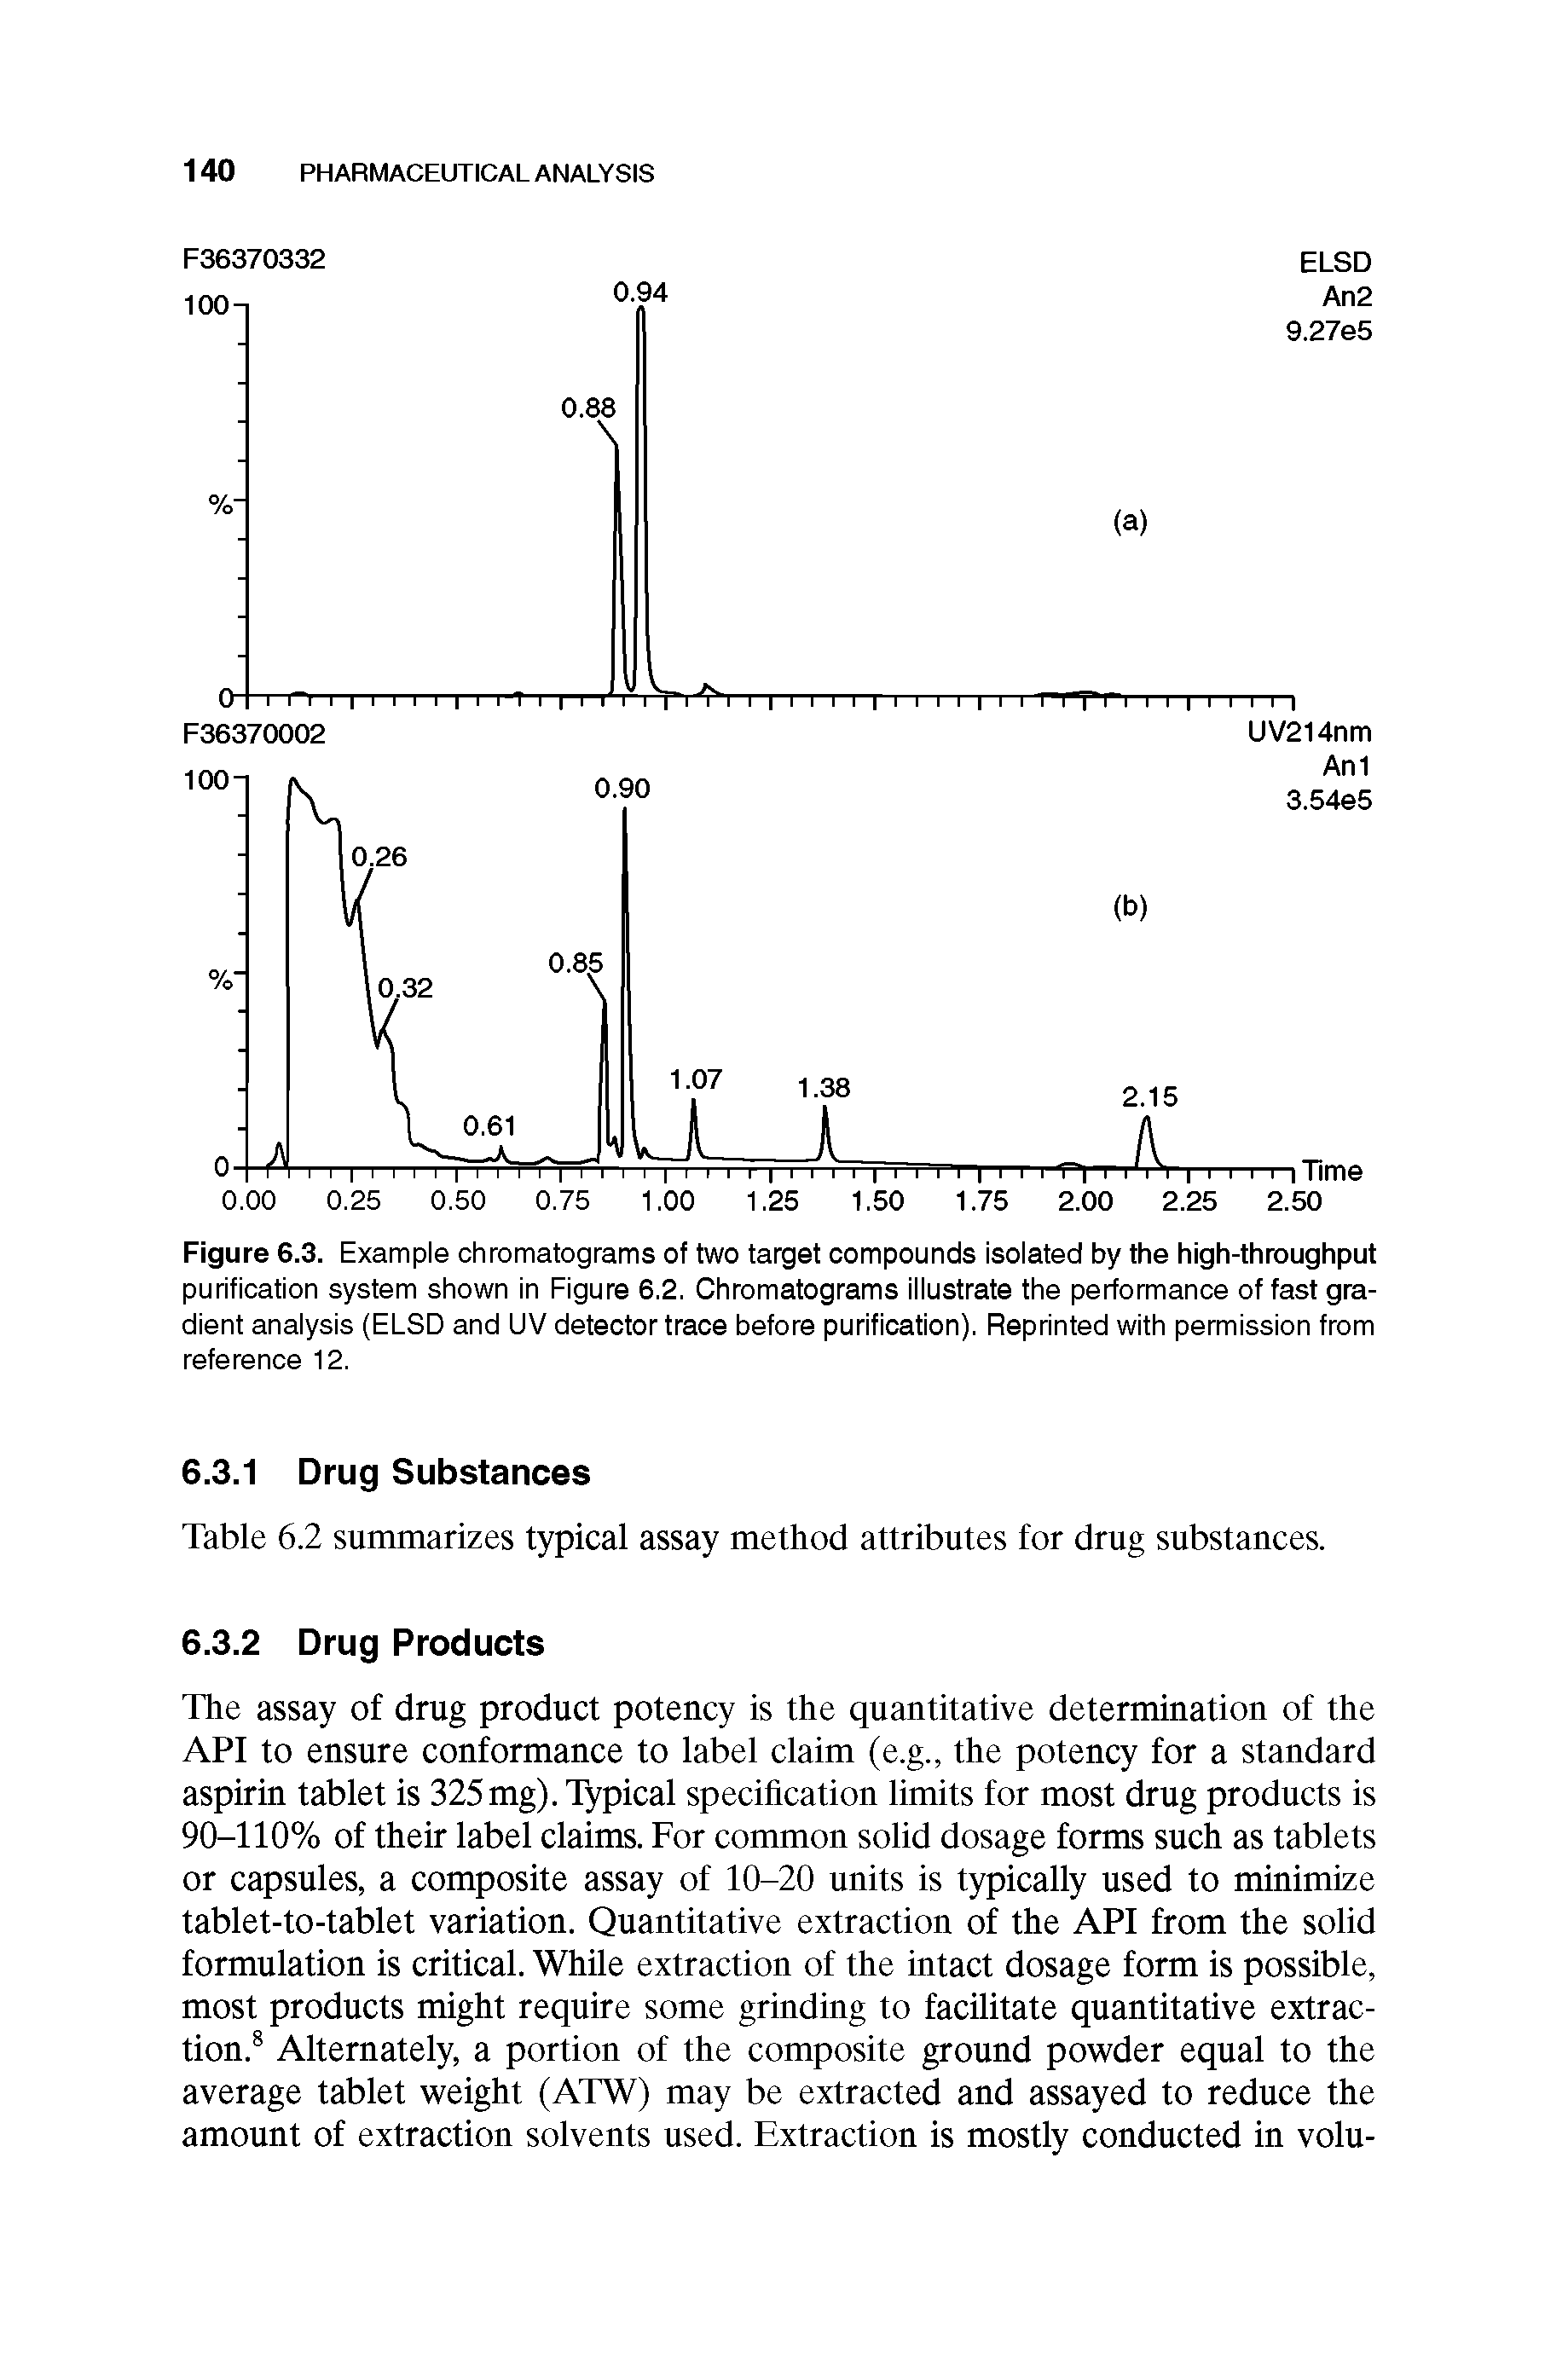 Figure 6.3. Example chromatograms of two target compounds isolated by the high-throughput purification system shown in Figure 6.2. Chromatograms illustrate the performance of fast gradient analysis (ELSD and UV detector trace before purification). Reprinted with permission from reference 12.